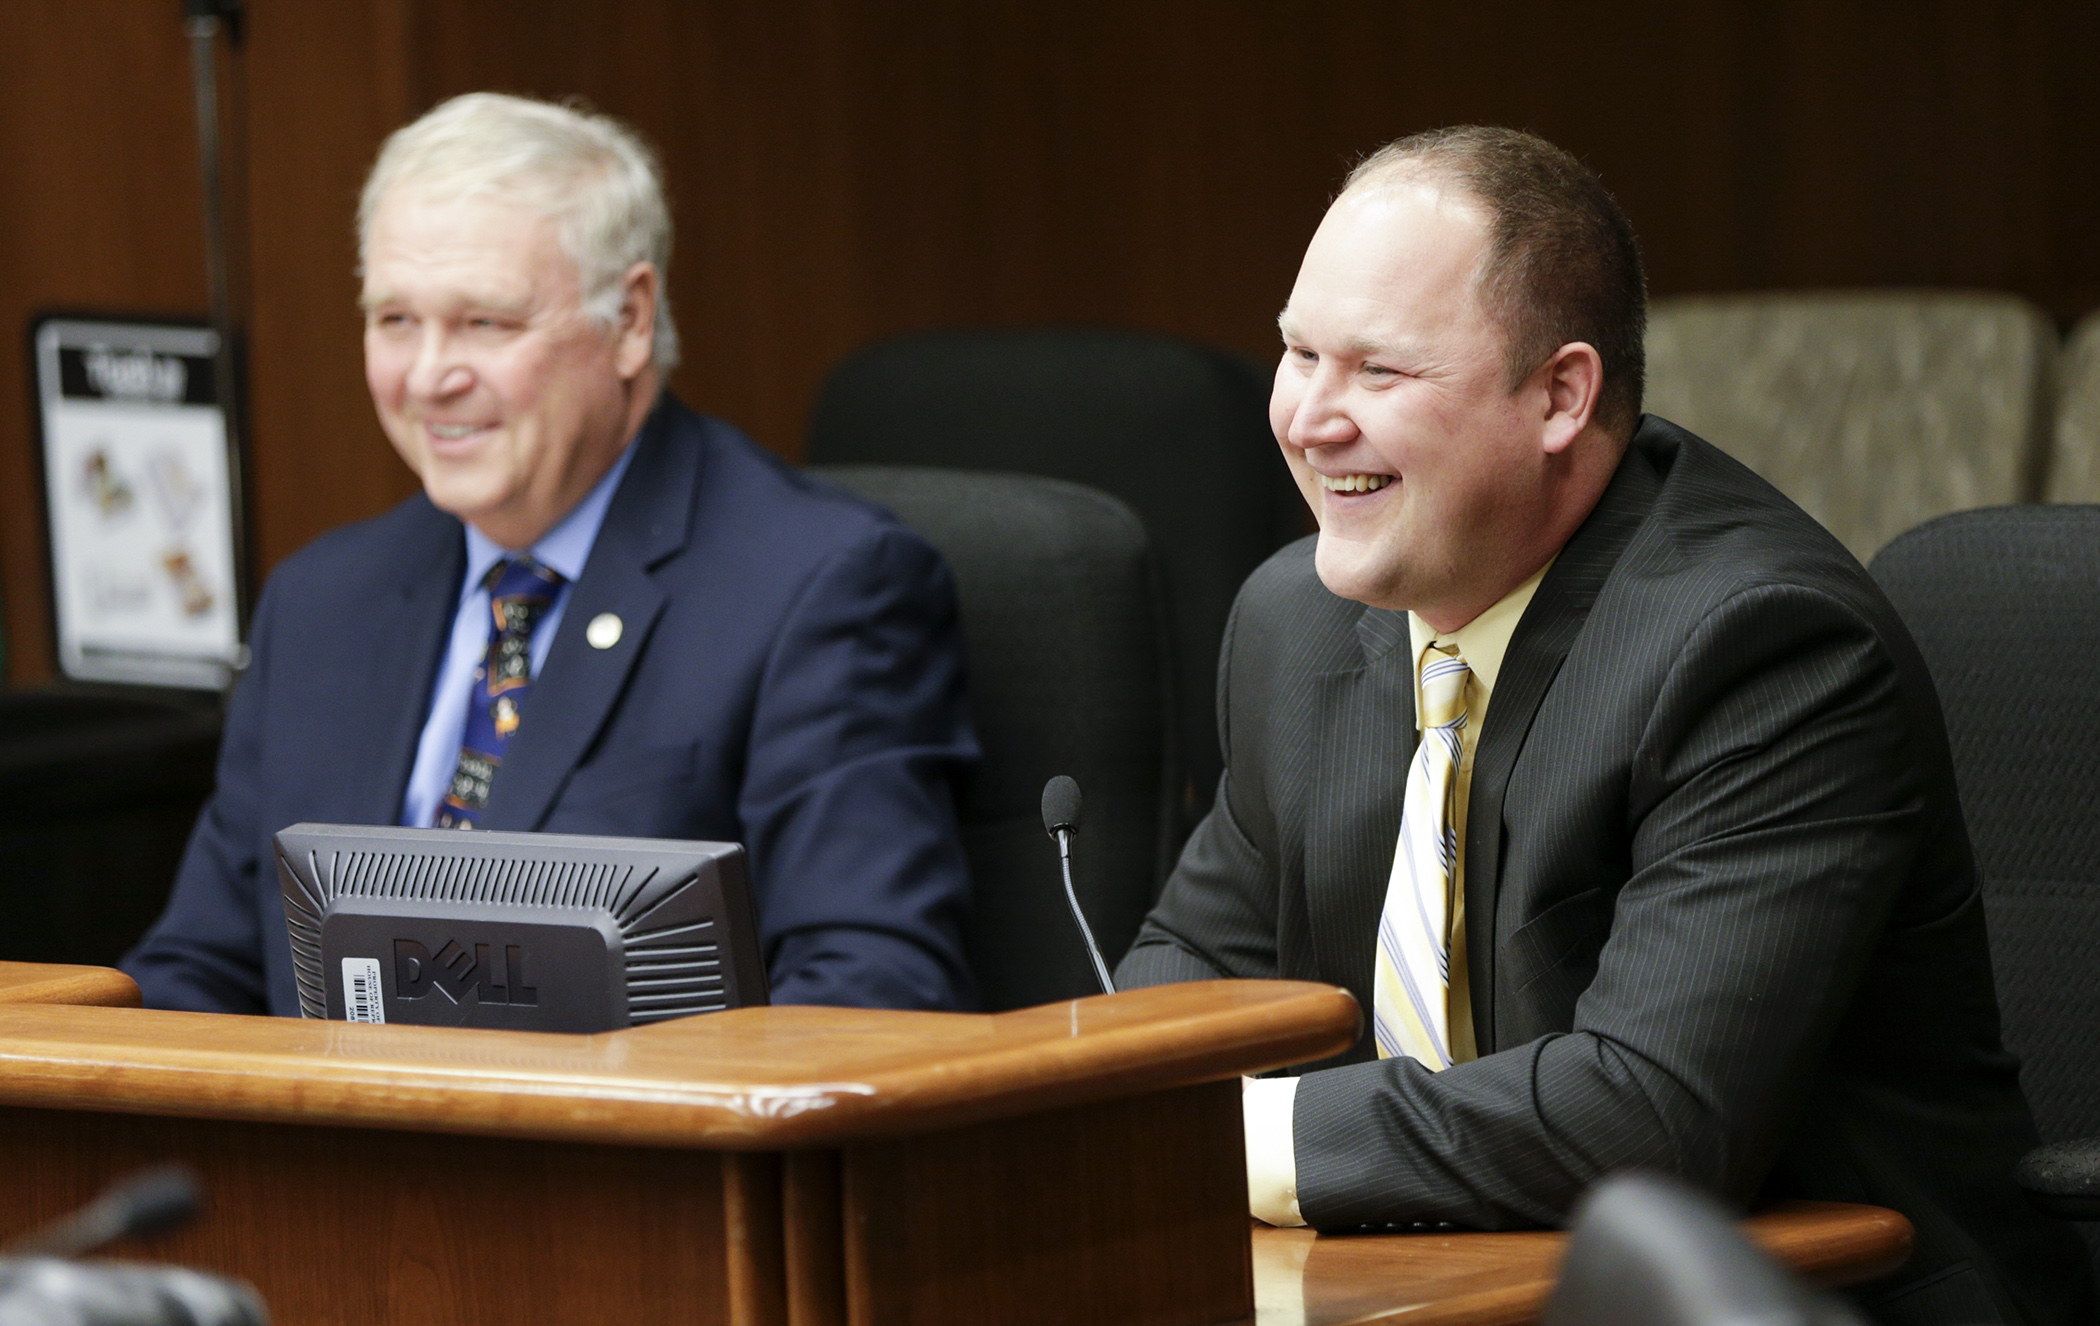 Troy Urdahl, right, testifies in favor of HF301, sponsored by his father, Rep. Dean Urdahl, left which would give a ticket and admission exemption for Minnesota State High School League events. Photo by Paul Battaglia